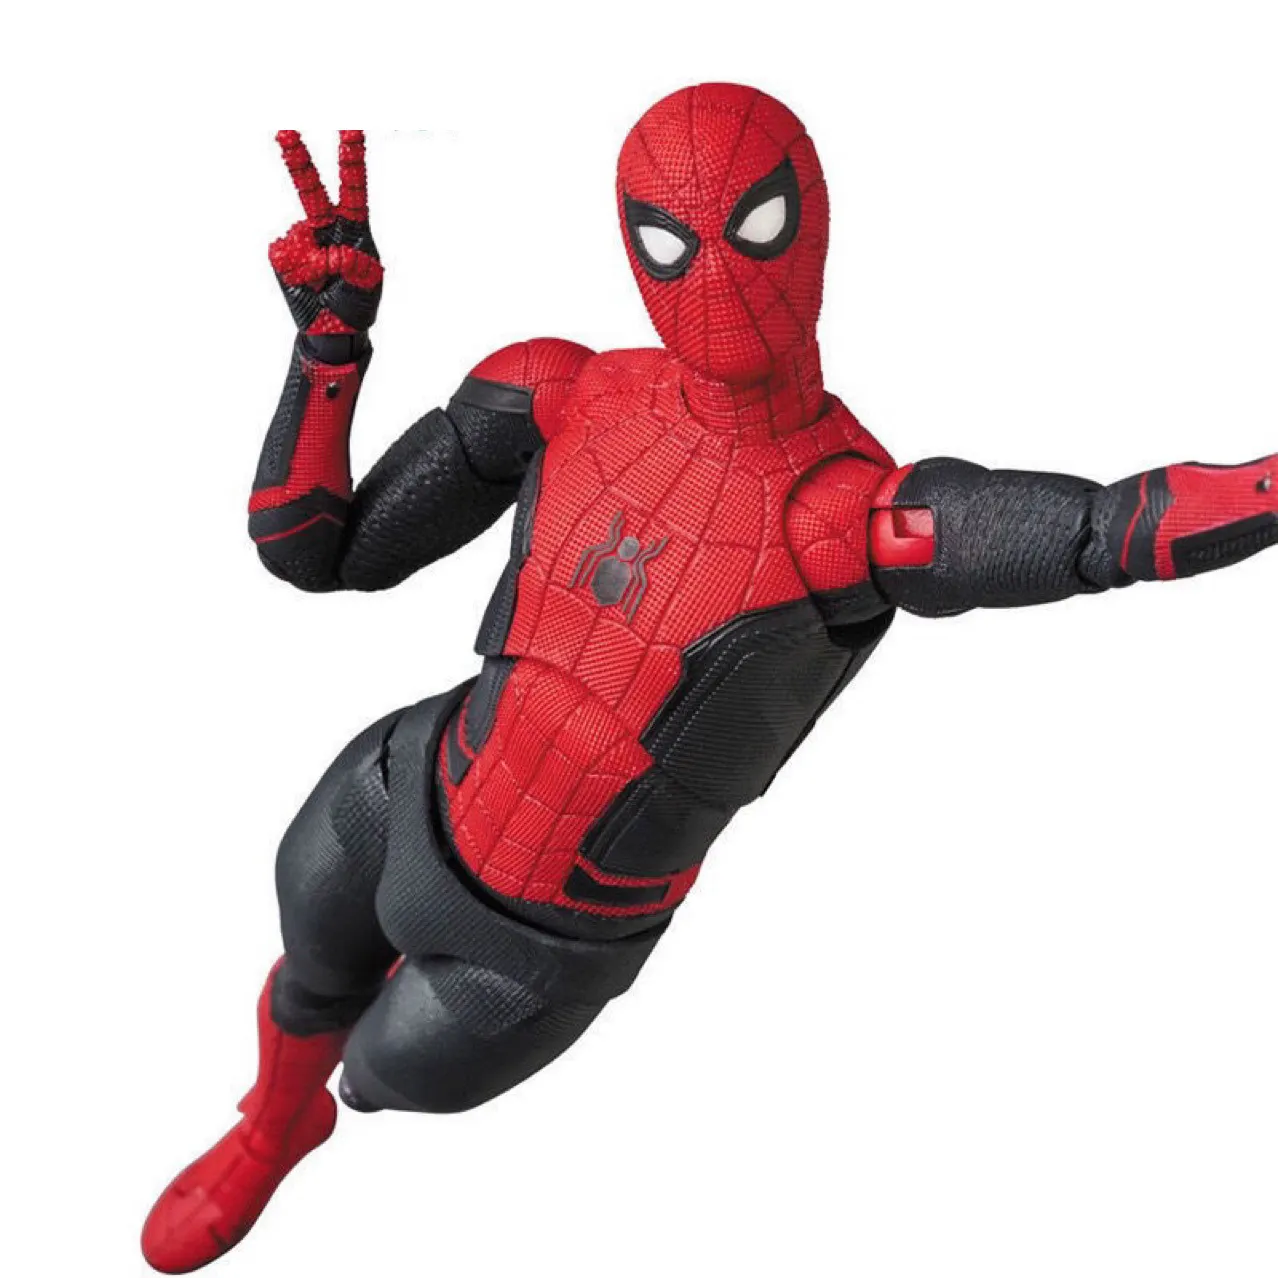 High quality Spiderman PVC Action Figure Spider Man Collectible Model Toy 15cm Spider Man Back to School Season Model Toys